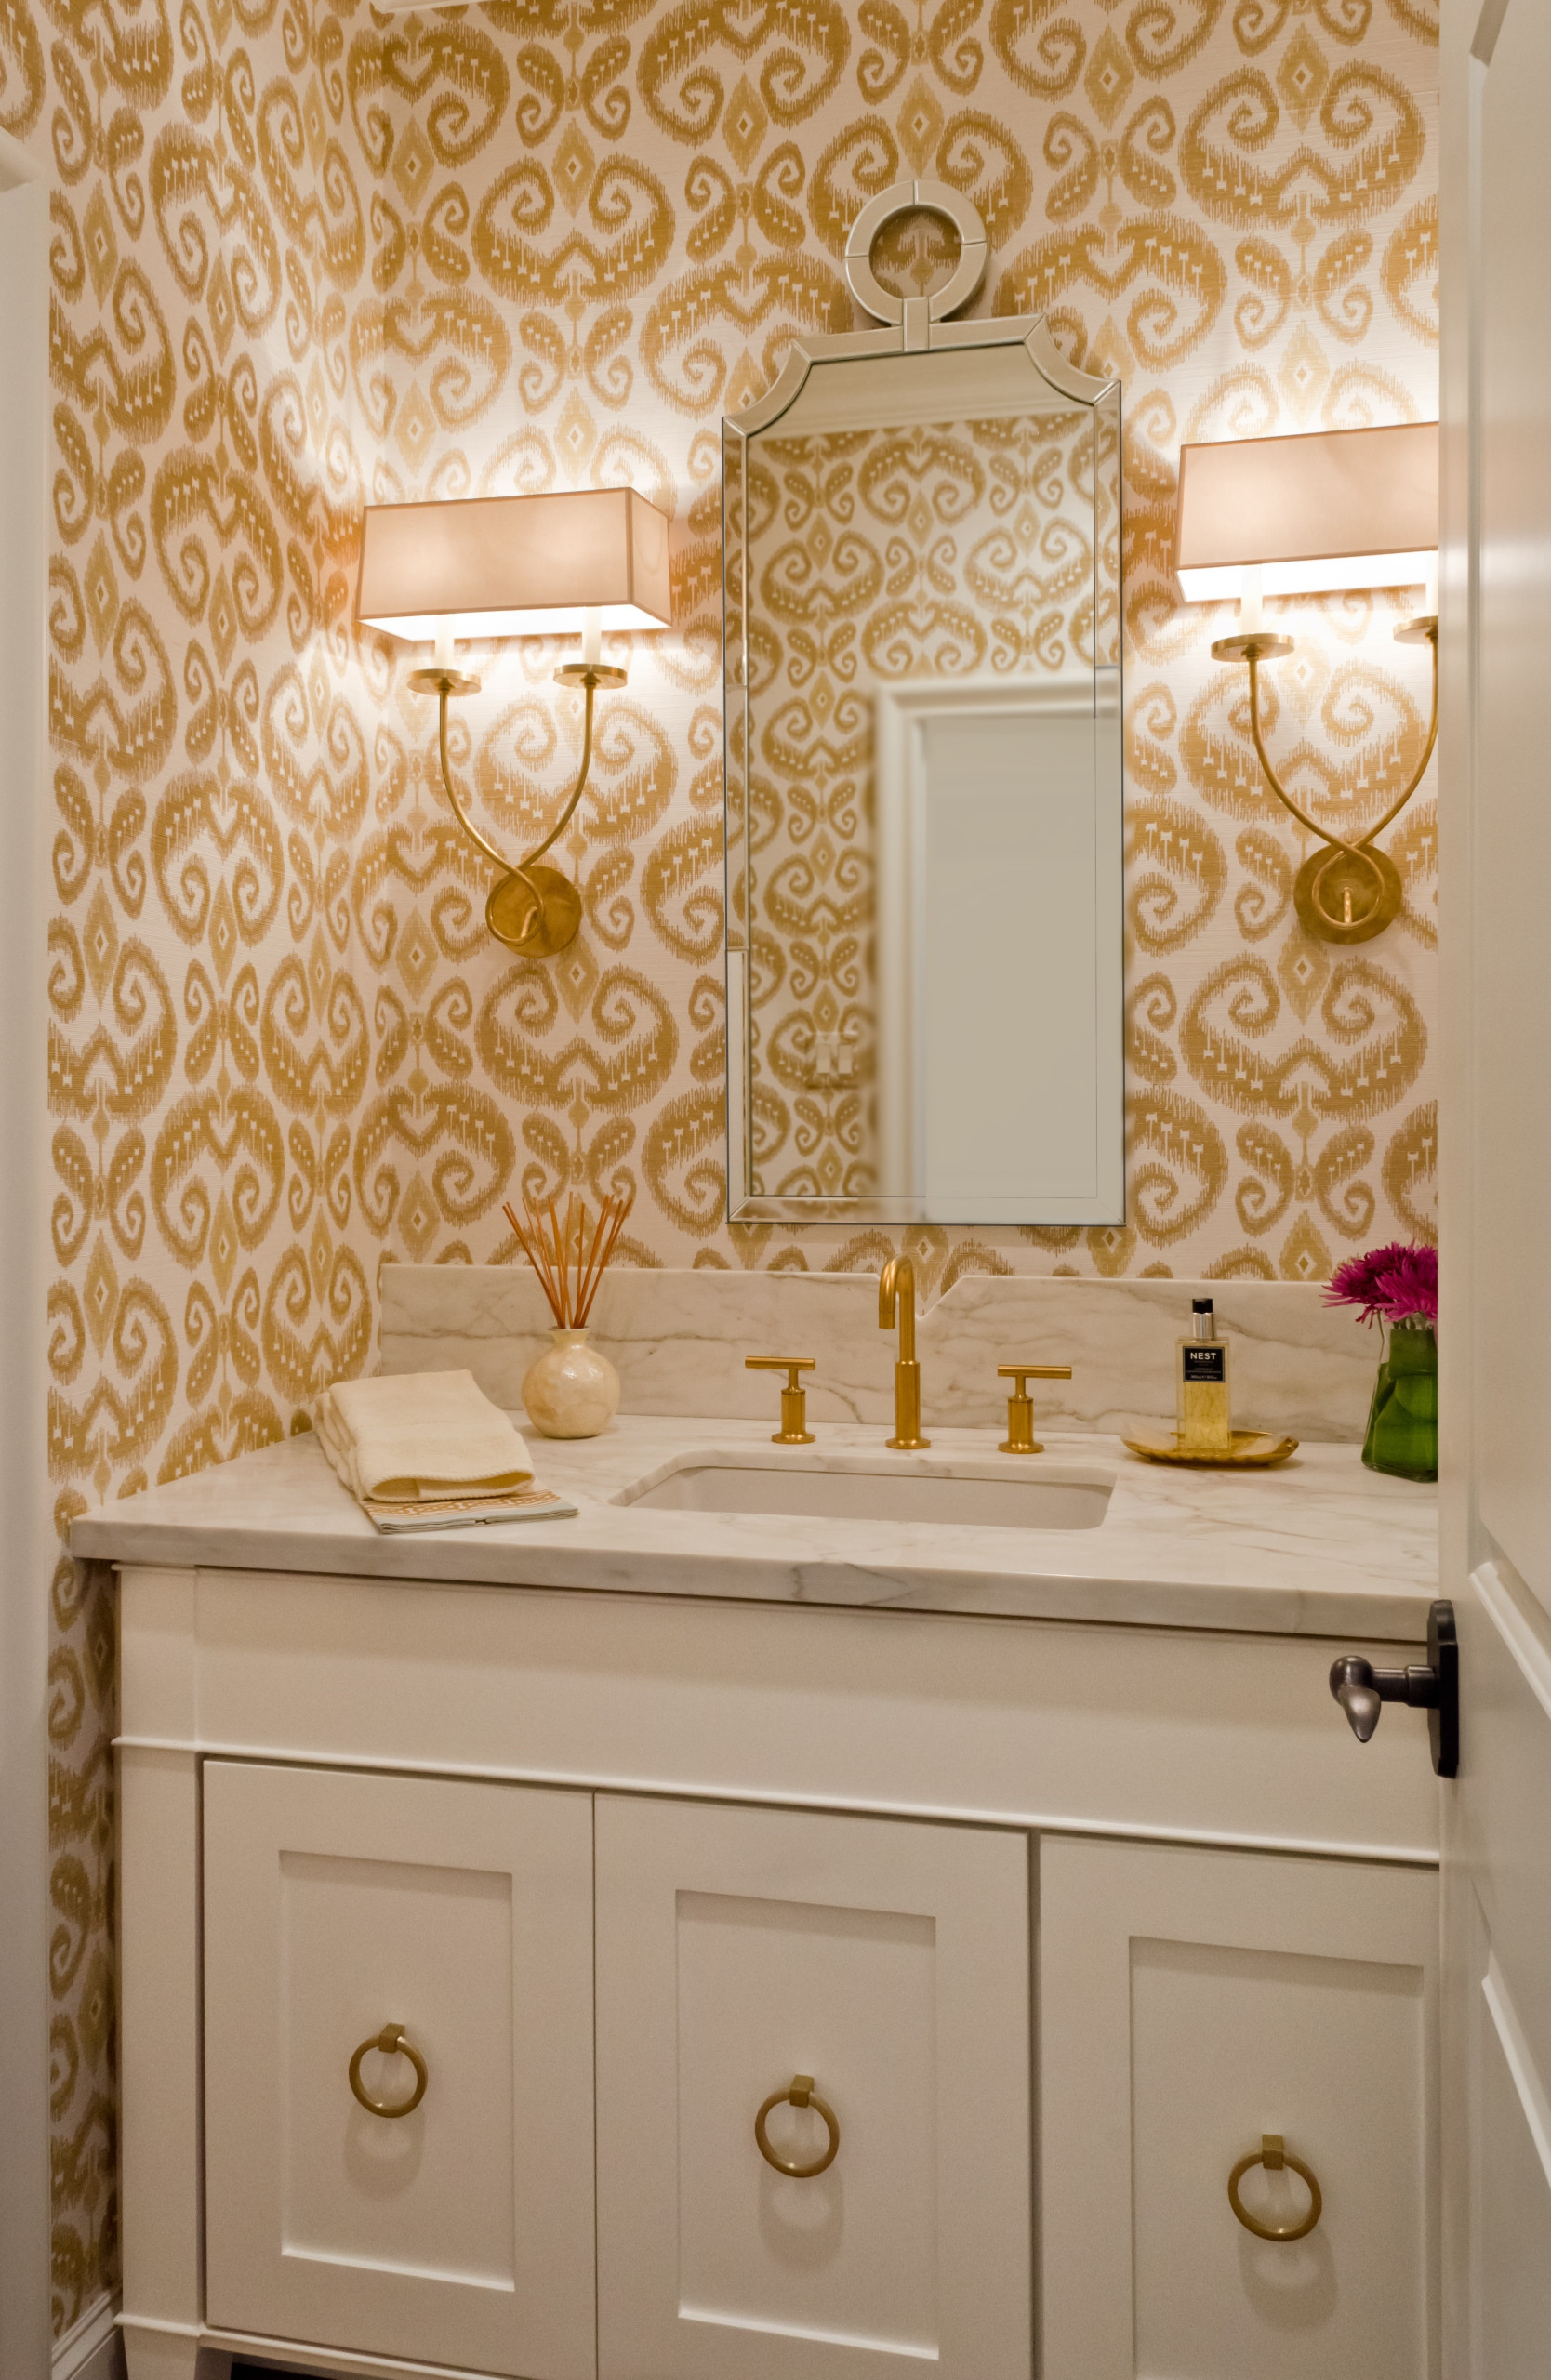 Bath with Gold Accents and Ikat grasscloth wallpaper - Transitional -  Bathroom - Austin - by BRADSHAW DESIGNS LLC | Houzz